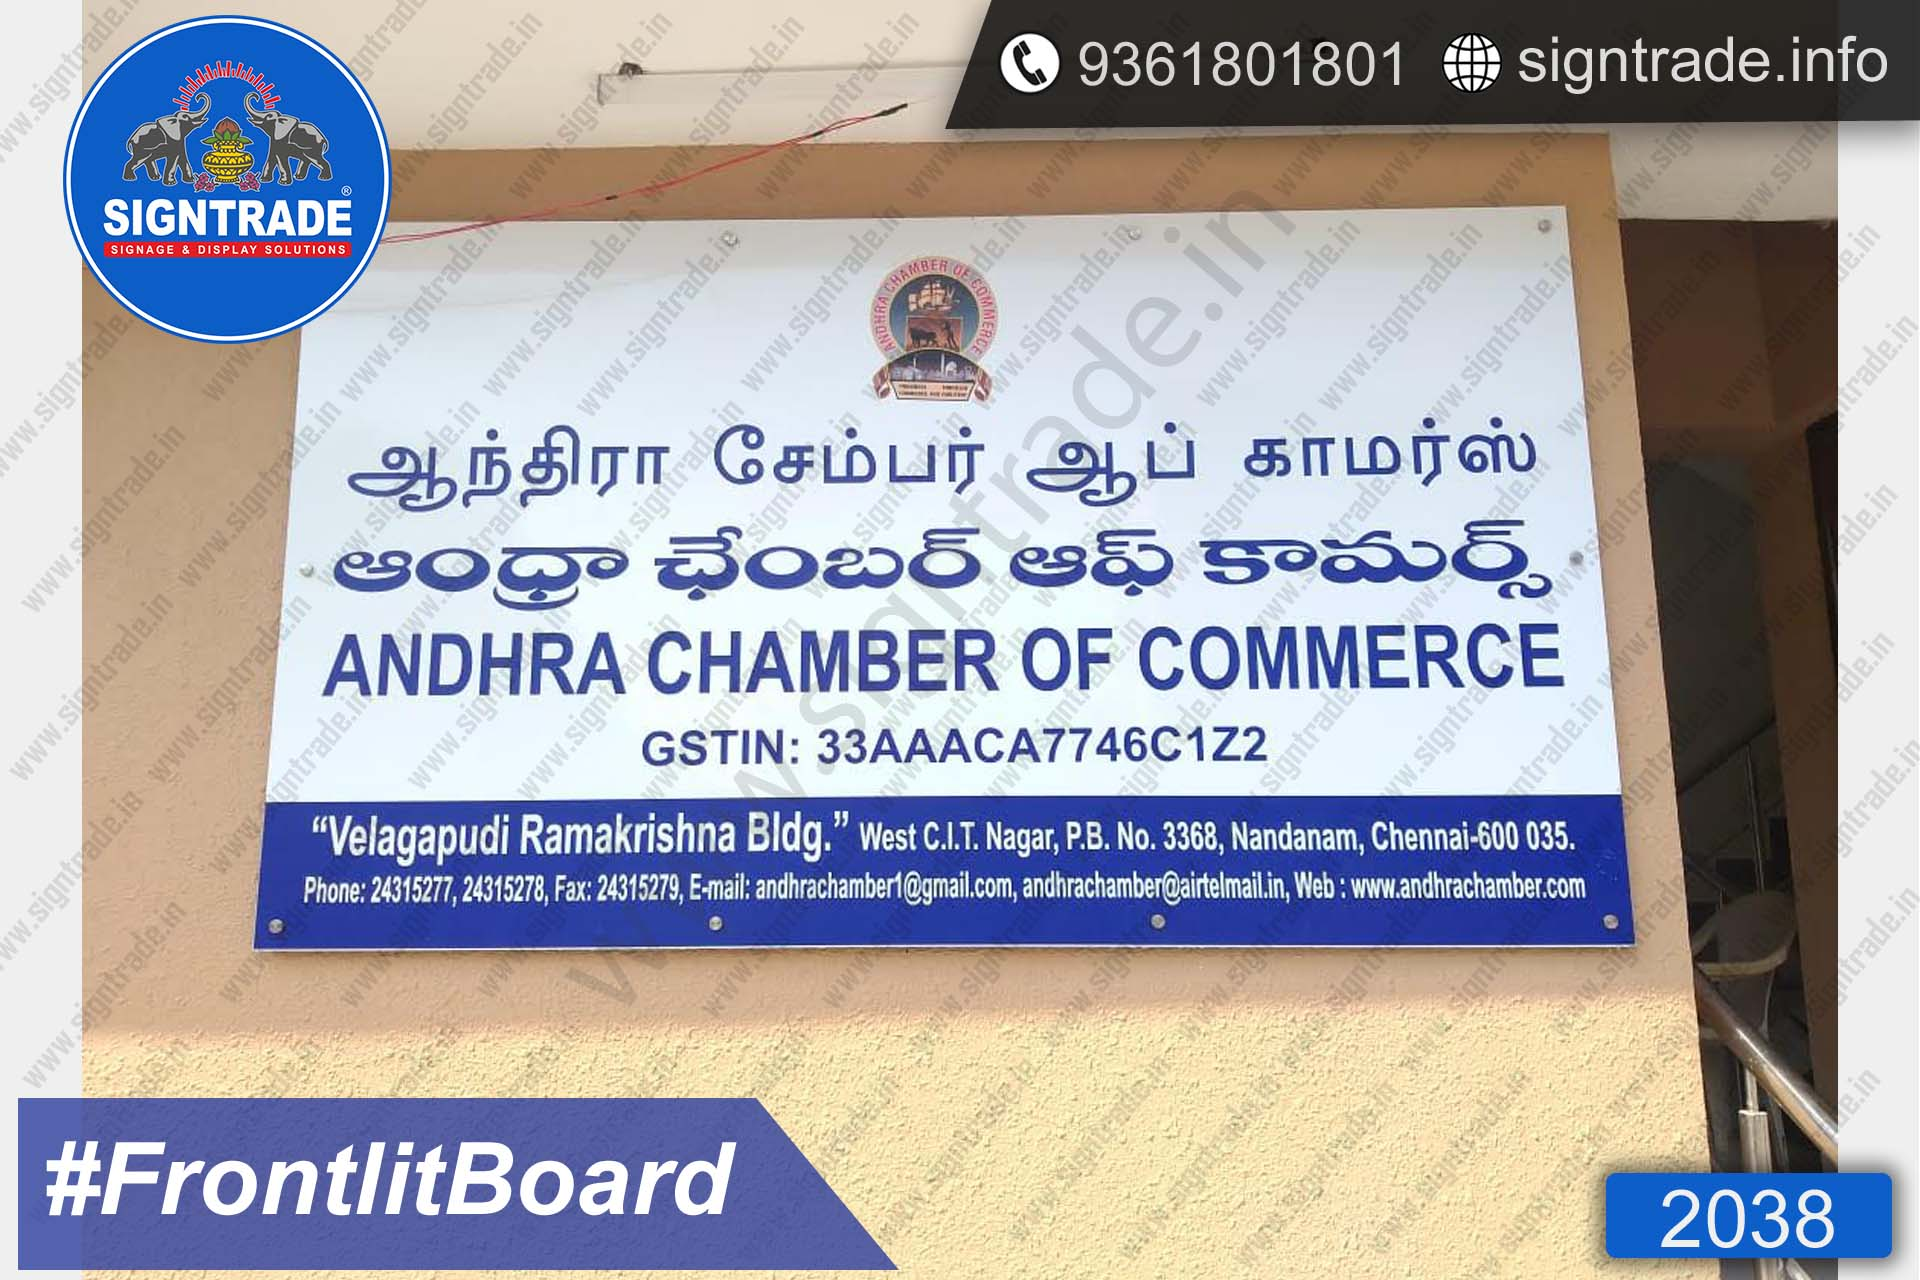 Andhra Chamber Of Commerce Frontlit Board